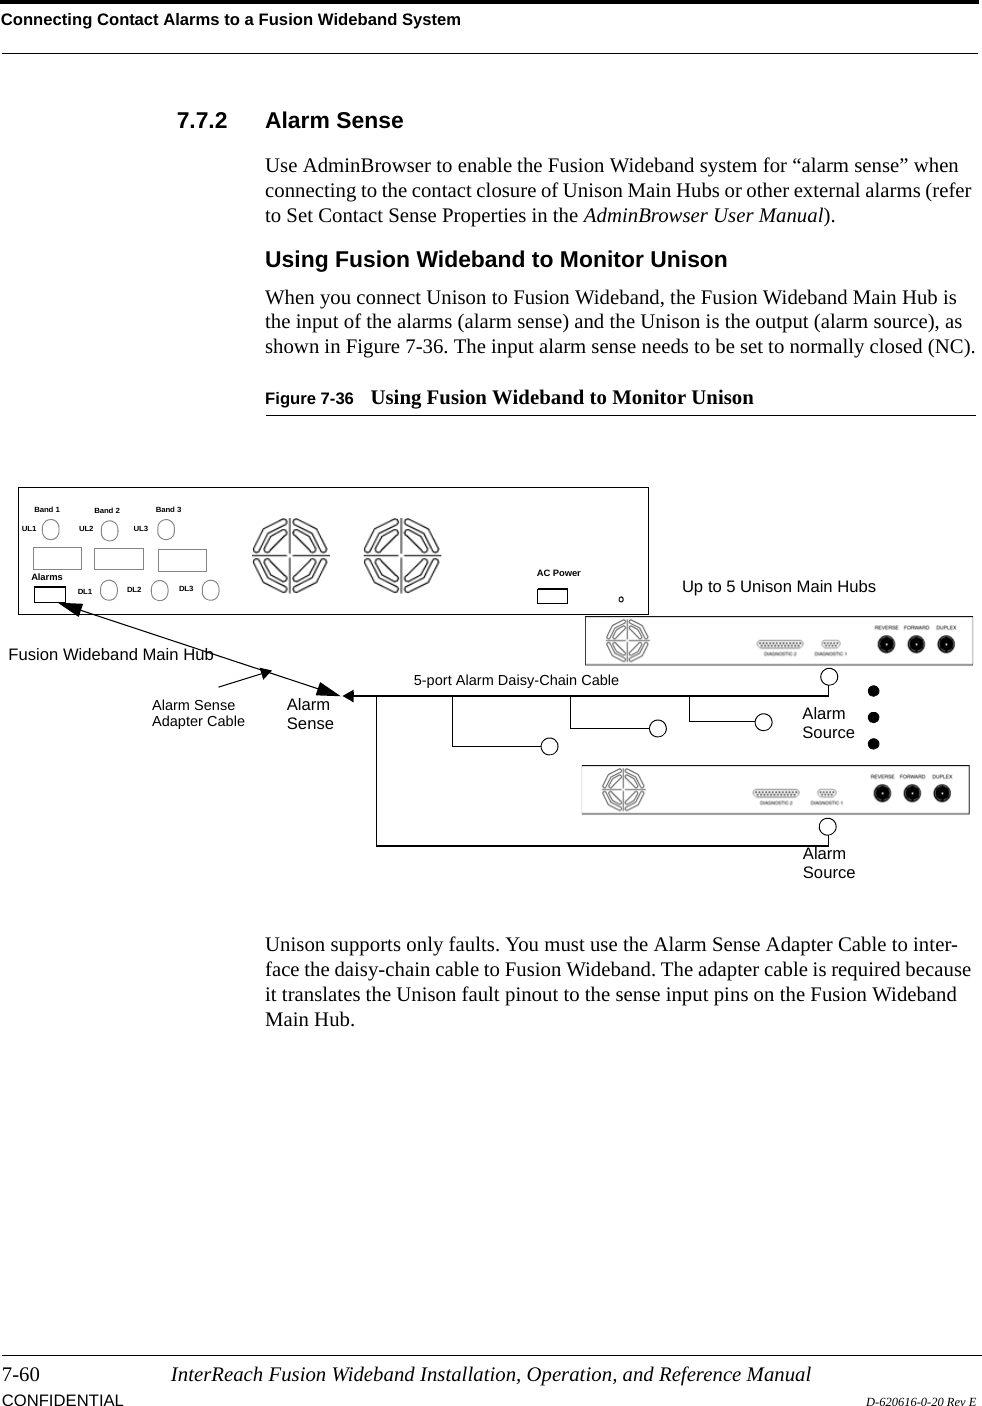 Connecting Contact Alarms to a Fusion Wideband System7-60 InterReach Fusion Wideband Installation, Operation, and Reference ManualCONFIDENTIAL D-620616-0-20 Rev E7.7.2 Alarm SenseUse AdminBrowser to enable the Fusion Wideband system for “alarm sense” when connecting to the contact closure of Unison Main Hubs or other external alarms (refer to Set Contact Sense Properties in the AdminBrowser User Manual).Using Fusion Wideband to Monitor UnisonWhen you connect Unison to Fusion Wideband, the Fusion Wideband Main Hub is the input of the alarms (alarm sense) and the Unison is the output (alarm source), as shown in Figure 7-36. The input alarm sense needs to be set to normally closed (NC).Figure 7-36 Using Fusion Wideband to Monitor UnisonUnison supports only faults. You must use the Alarm Sense Adapter Cable to inter-face the daisy-chain cable to Fusion Wideband. The adapter cable is required because it translates the Unison fault pinout to the sense input pins on the Fusion Wideband Main Hub.Up to 5 Unison Main HubsFusion Wideband Main HubAlarmSourceAlarmSense AlarmSourceAlarm SenseAdapter Cable5-port Alarm Daisy-Chain CableBand 1 Band 2 Band 3UL1 UL2 UL3DL1 DL2 DL3AC PowerAlarms